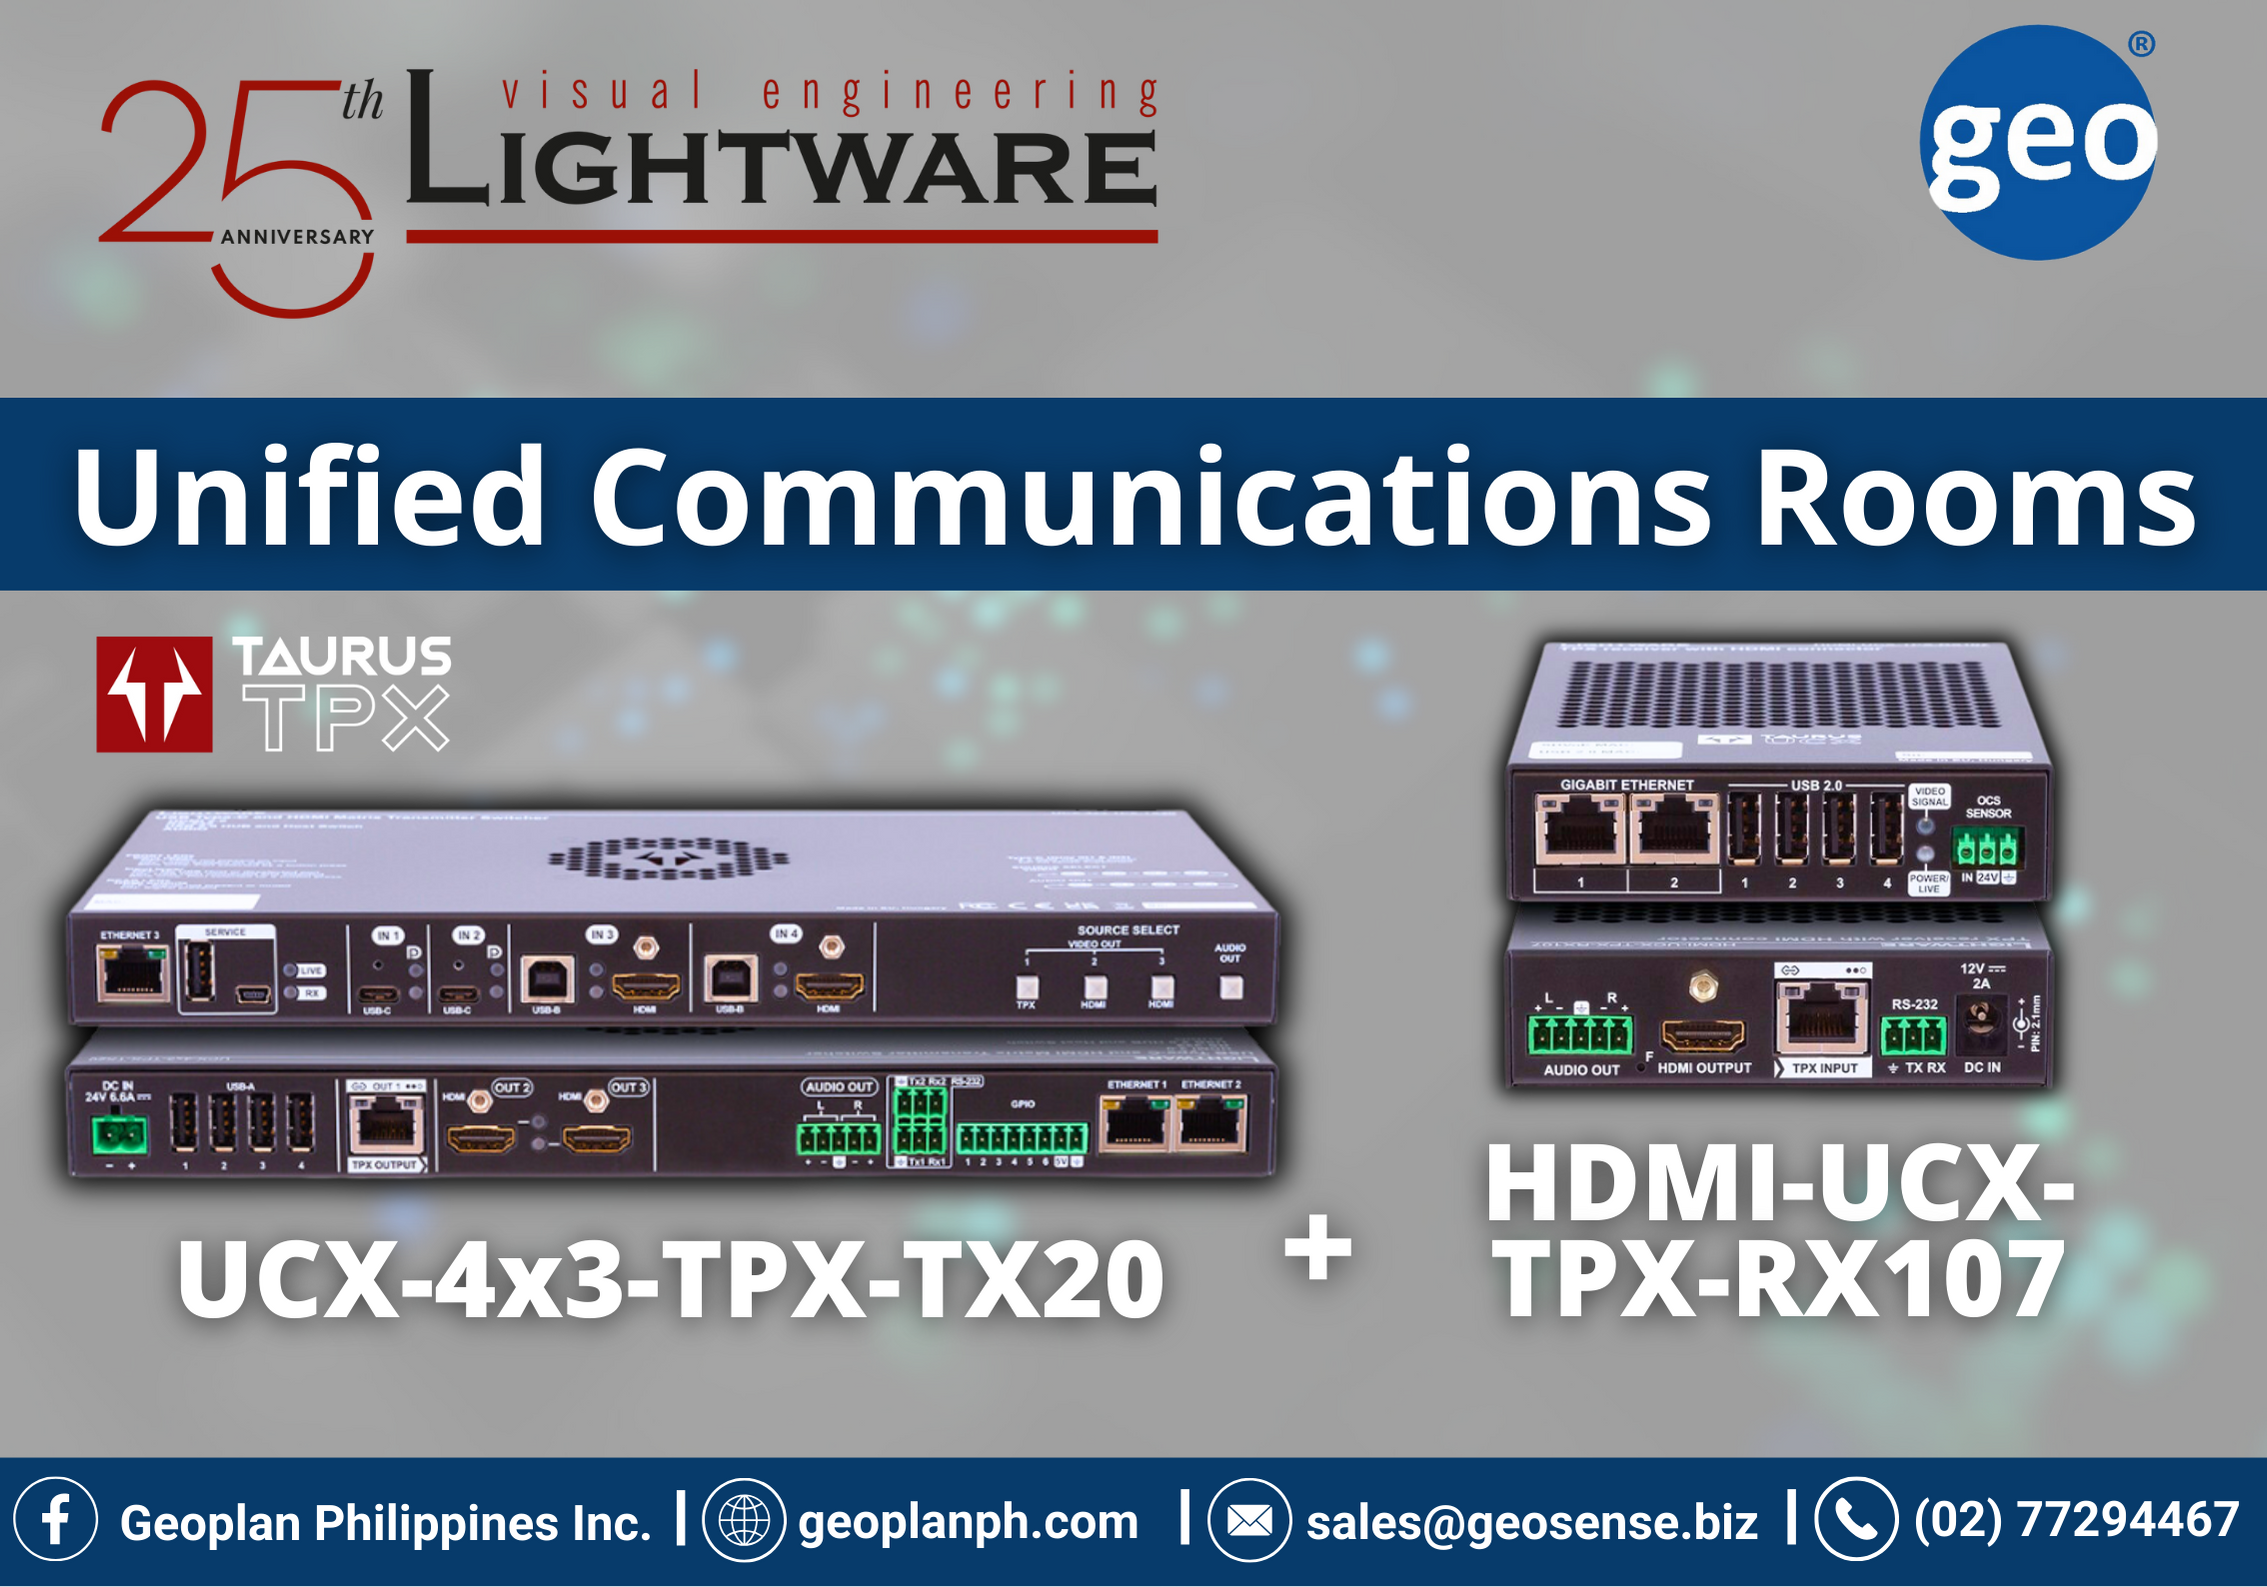 Lightware: The New Age of Unified Communications Rooms